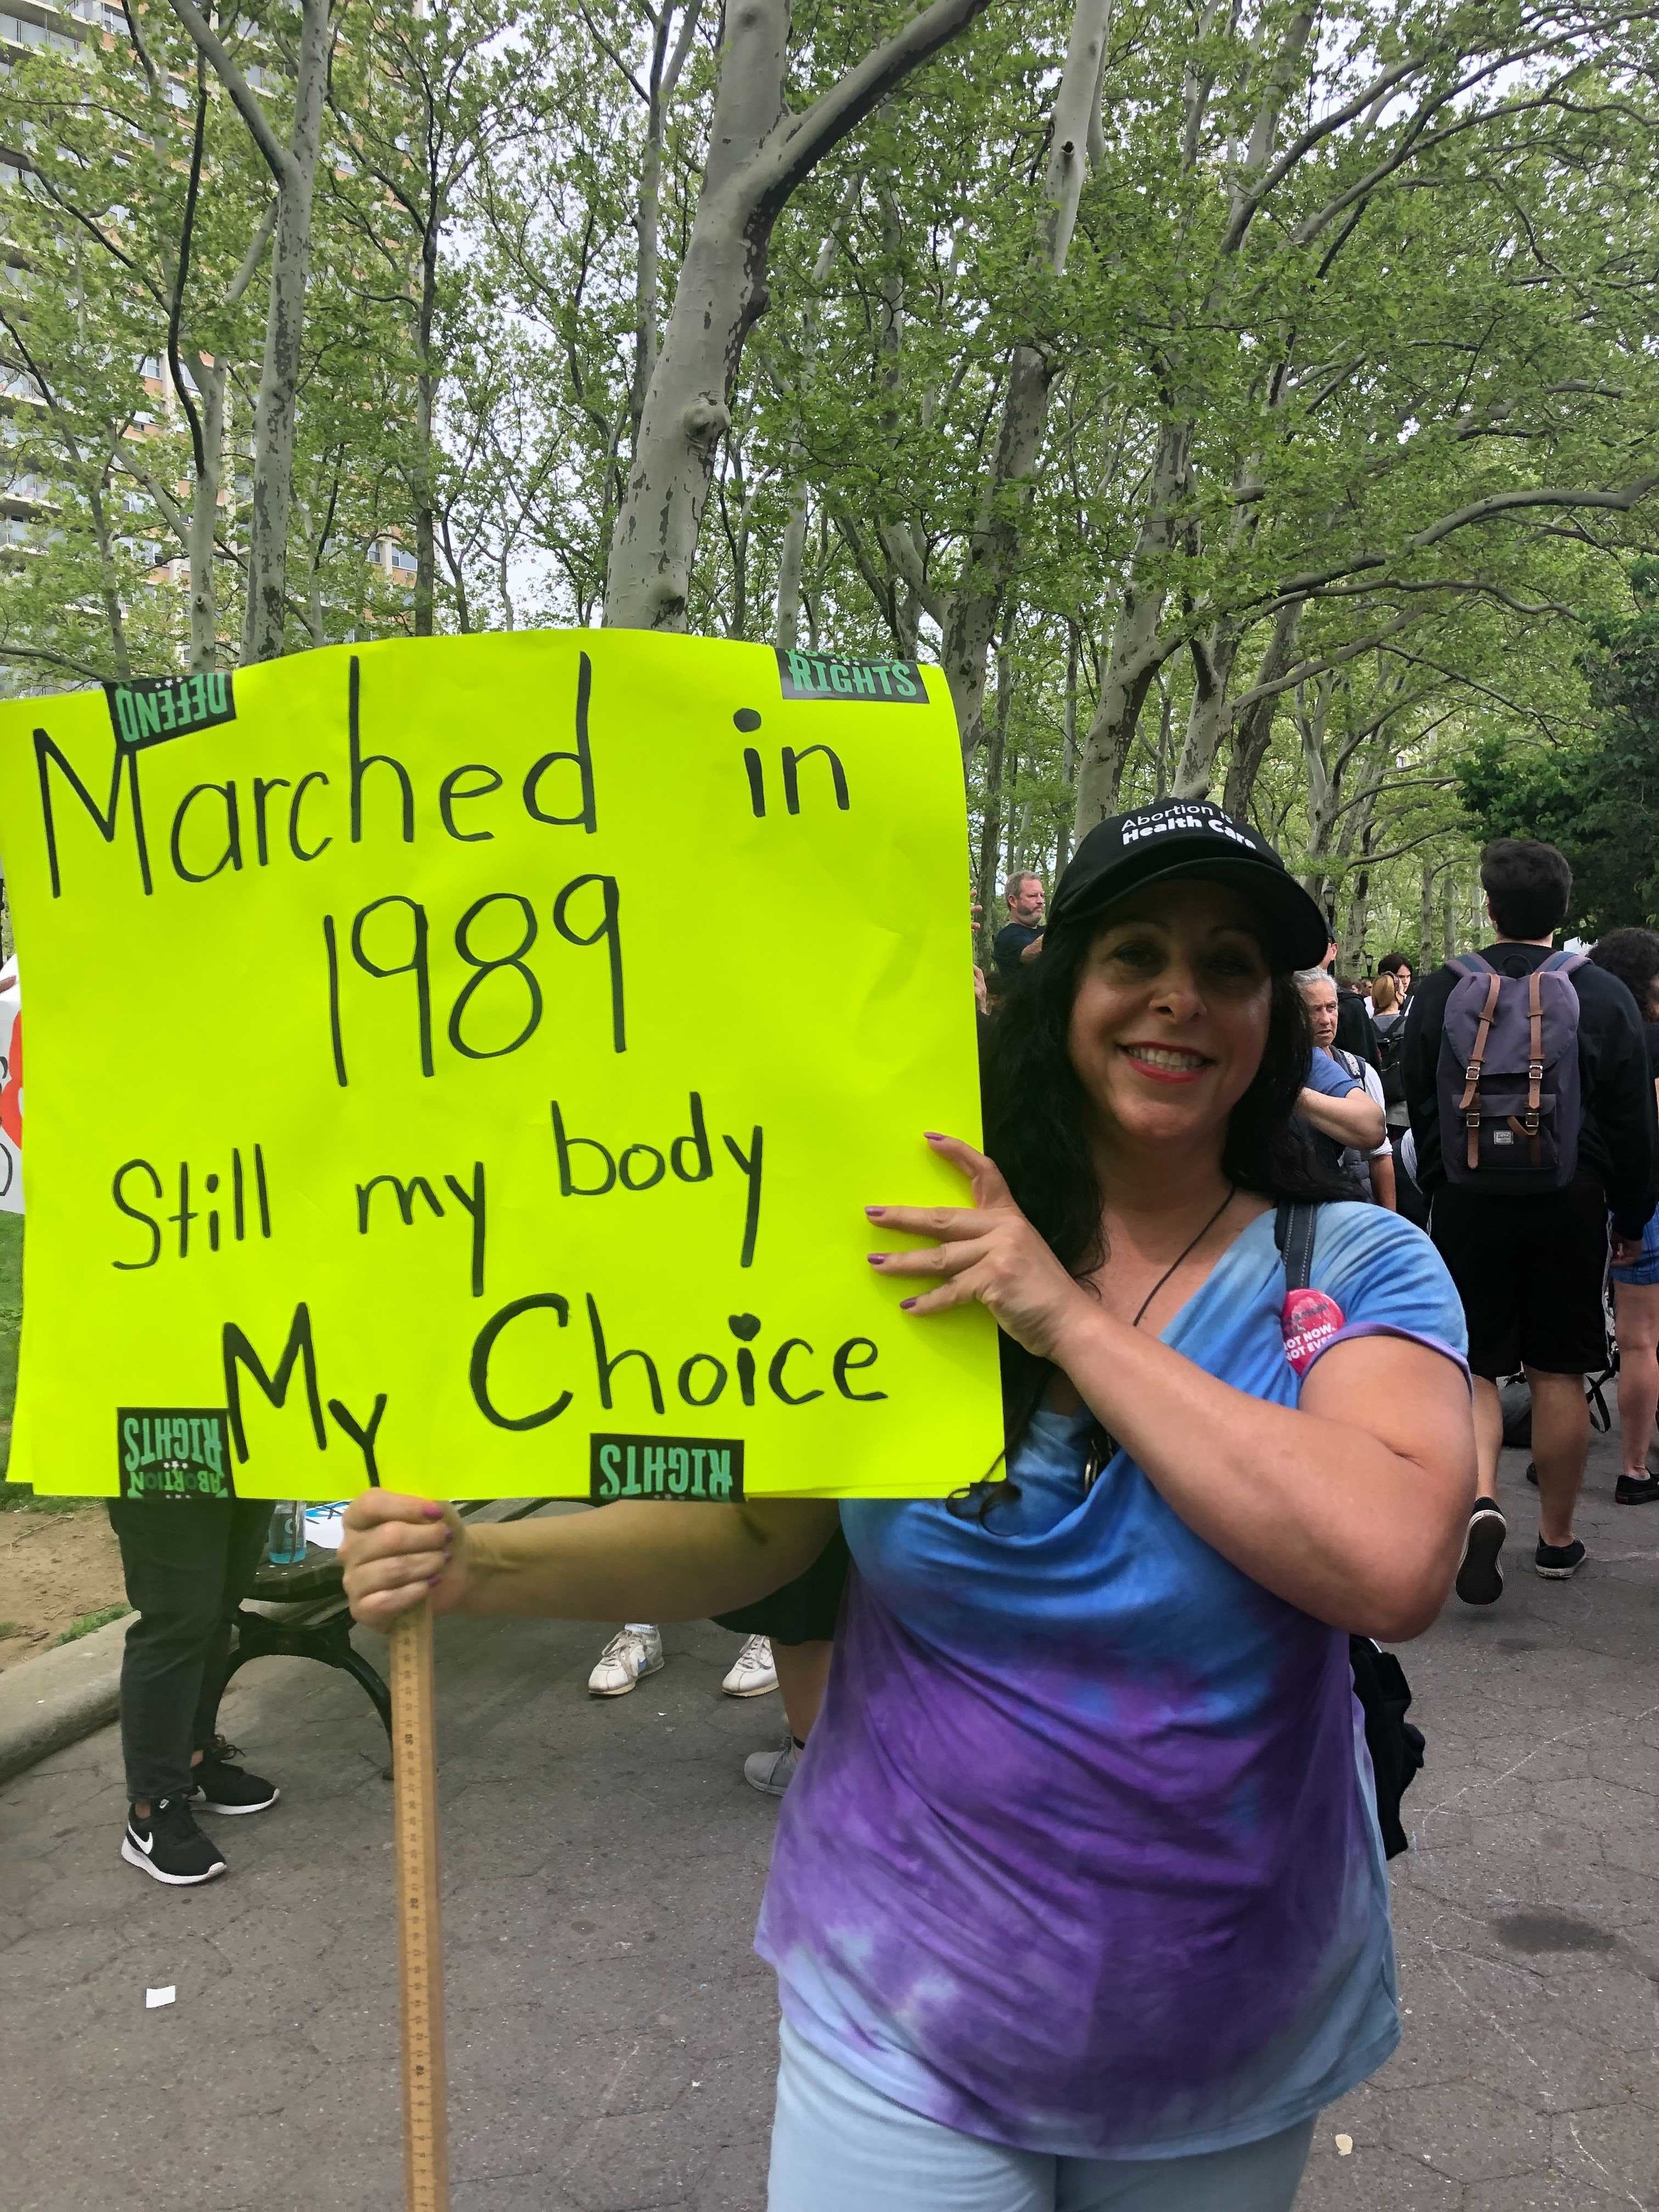 A protestor with her sign, &quot;Marched in 1989, still my body my choice&quot;